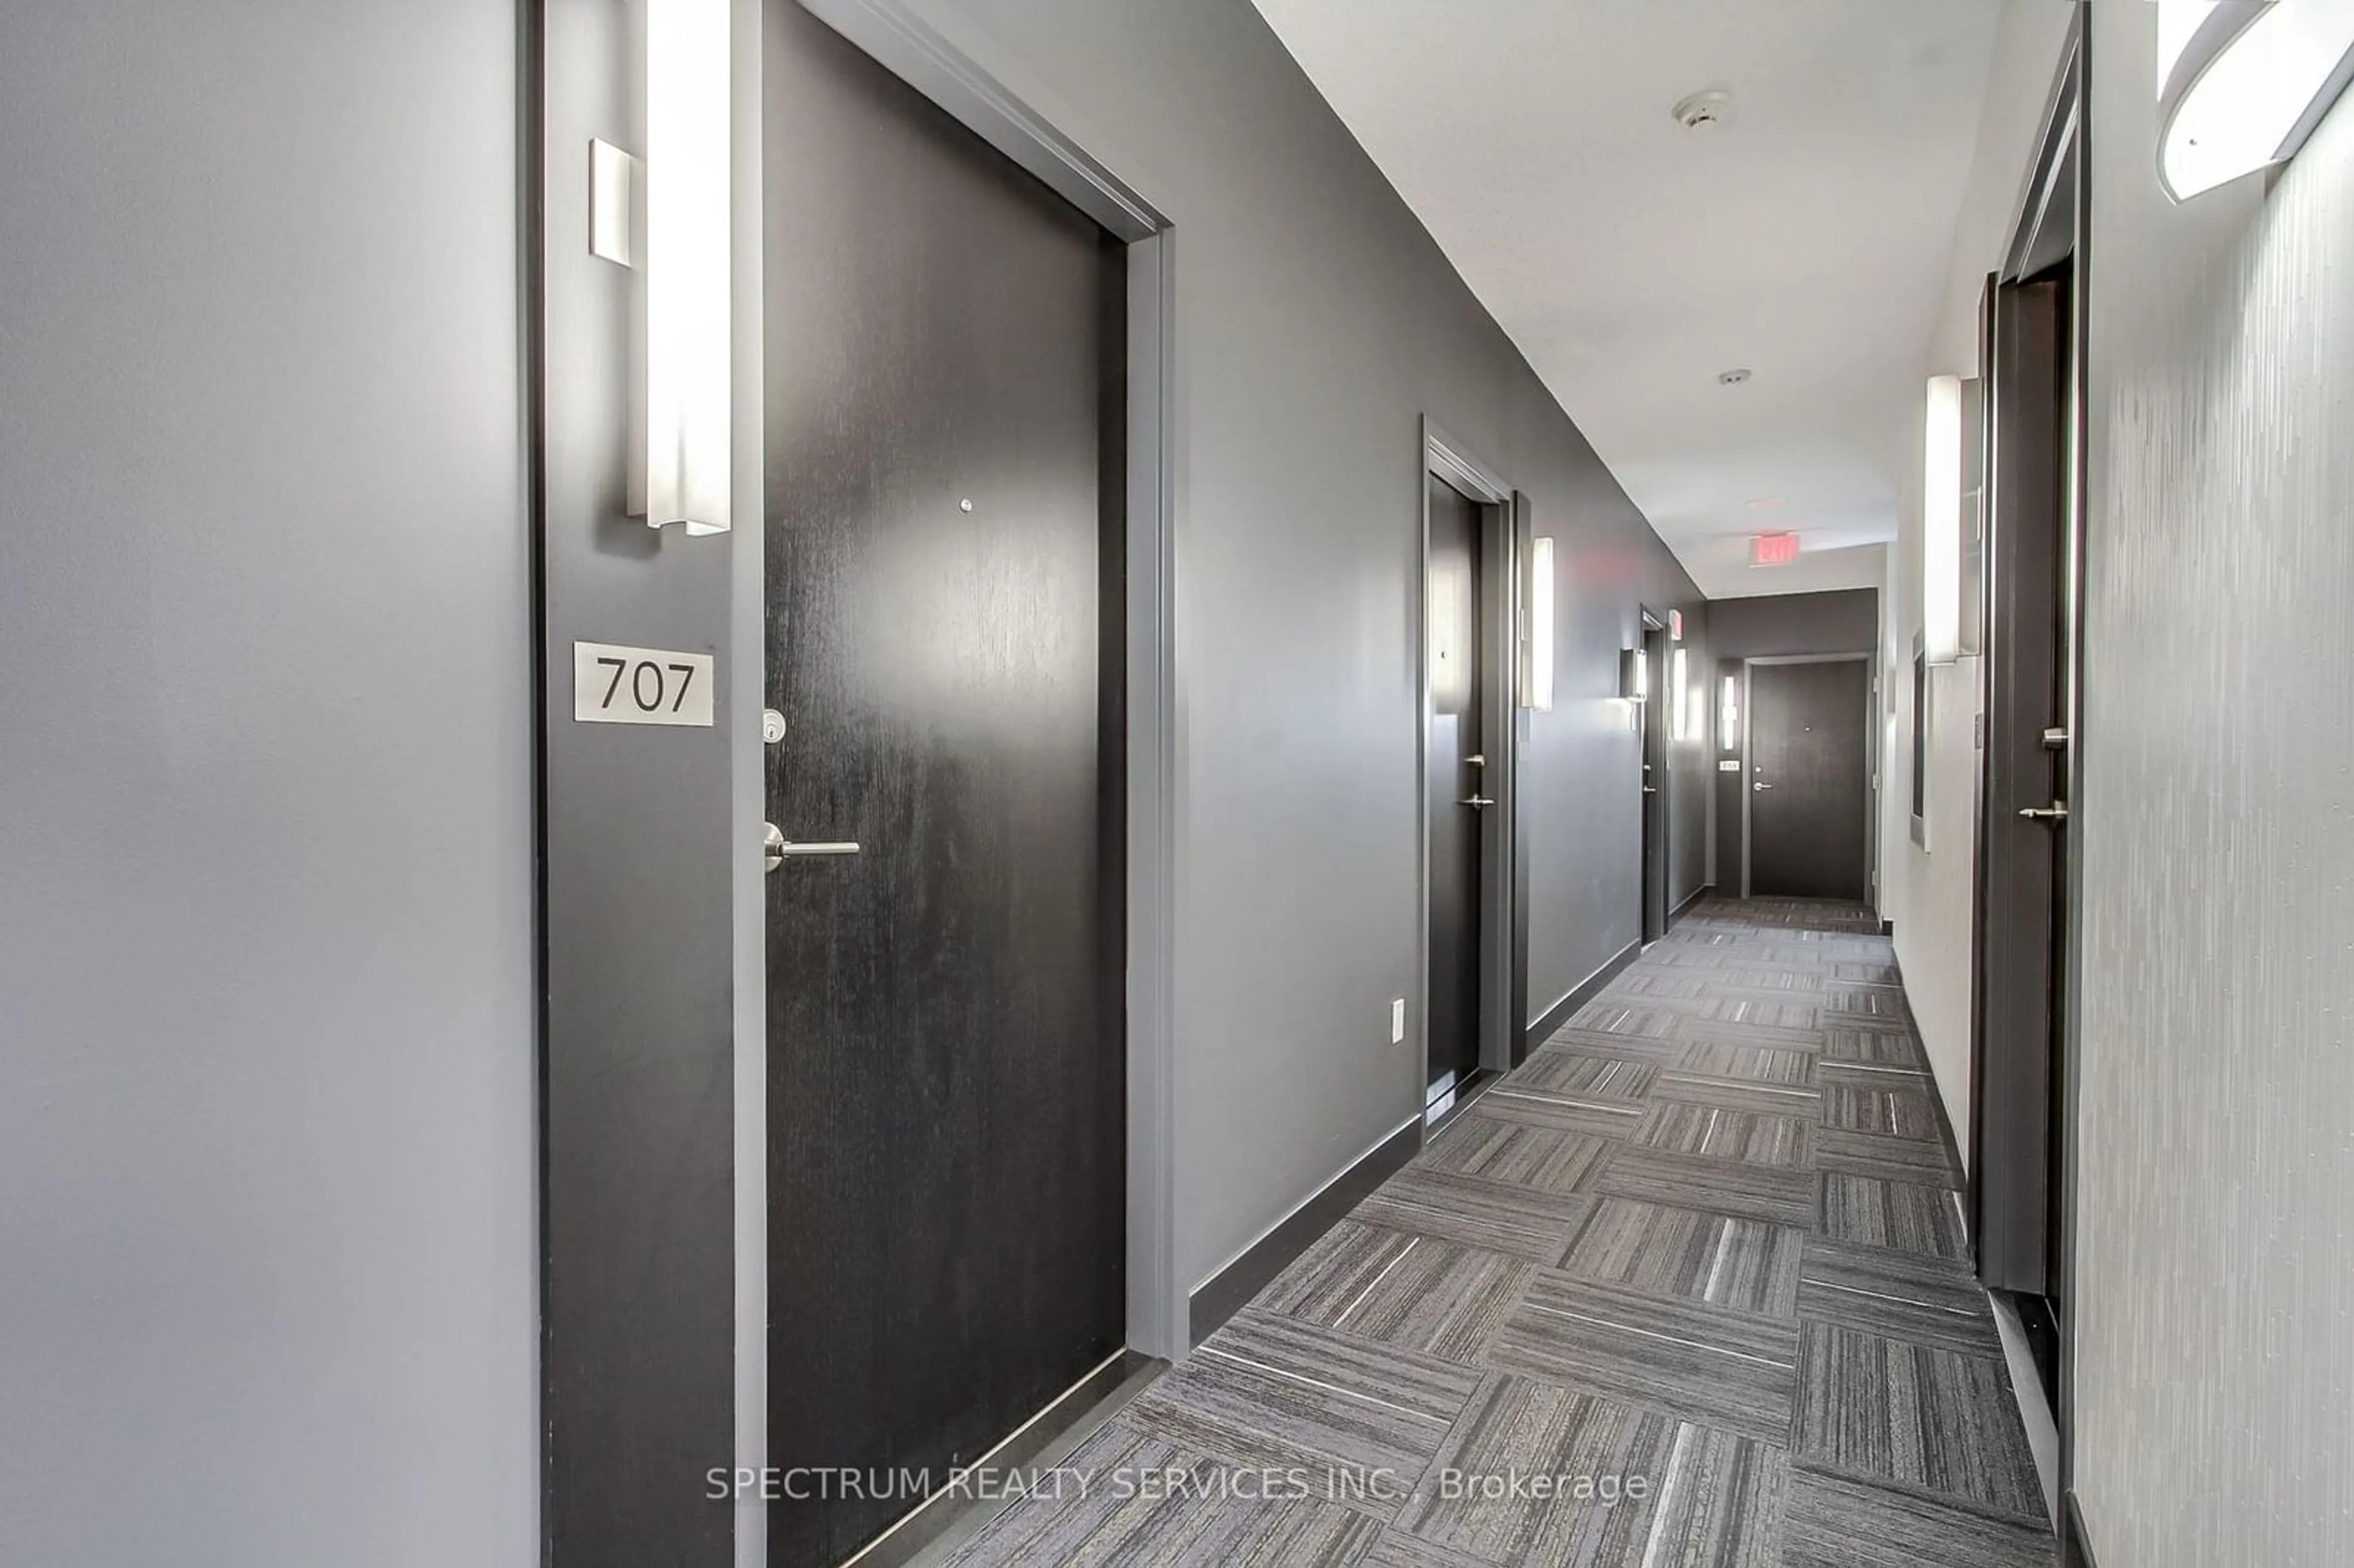 Other indoor space for 775 King St #707, Toronto Ontario M5V 2K3